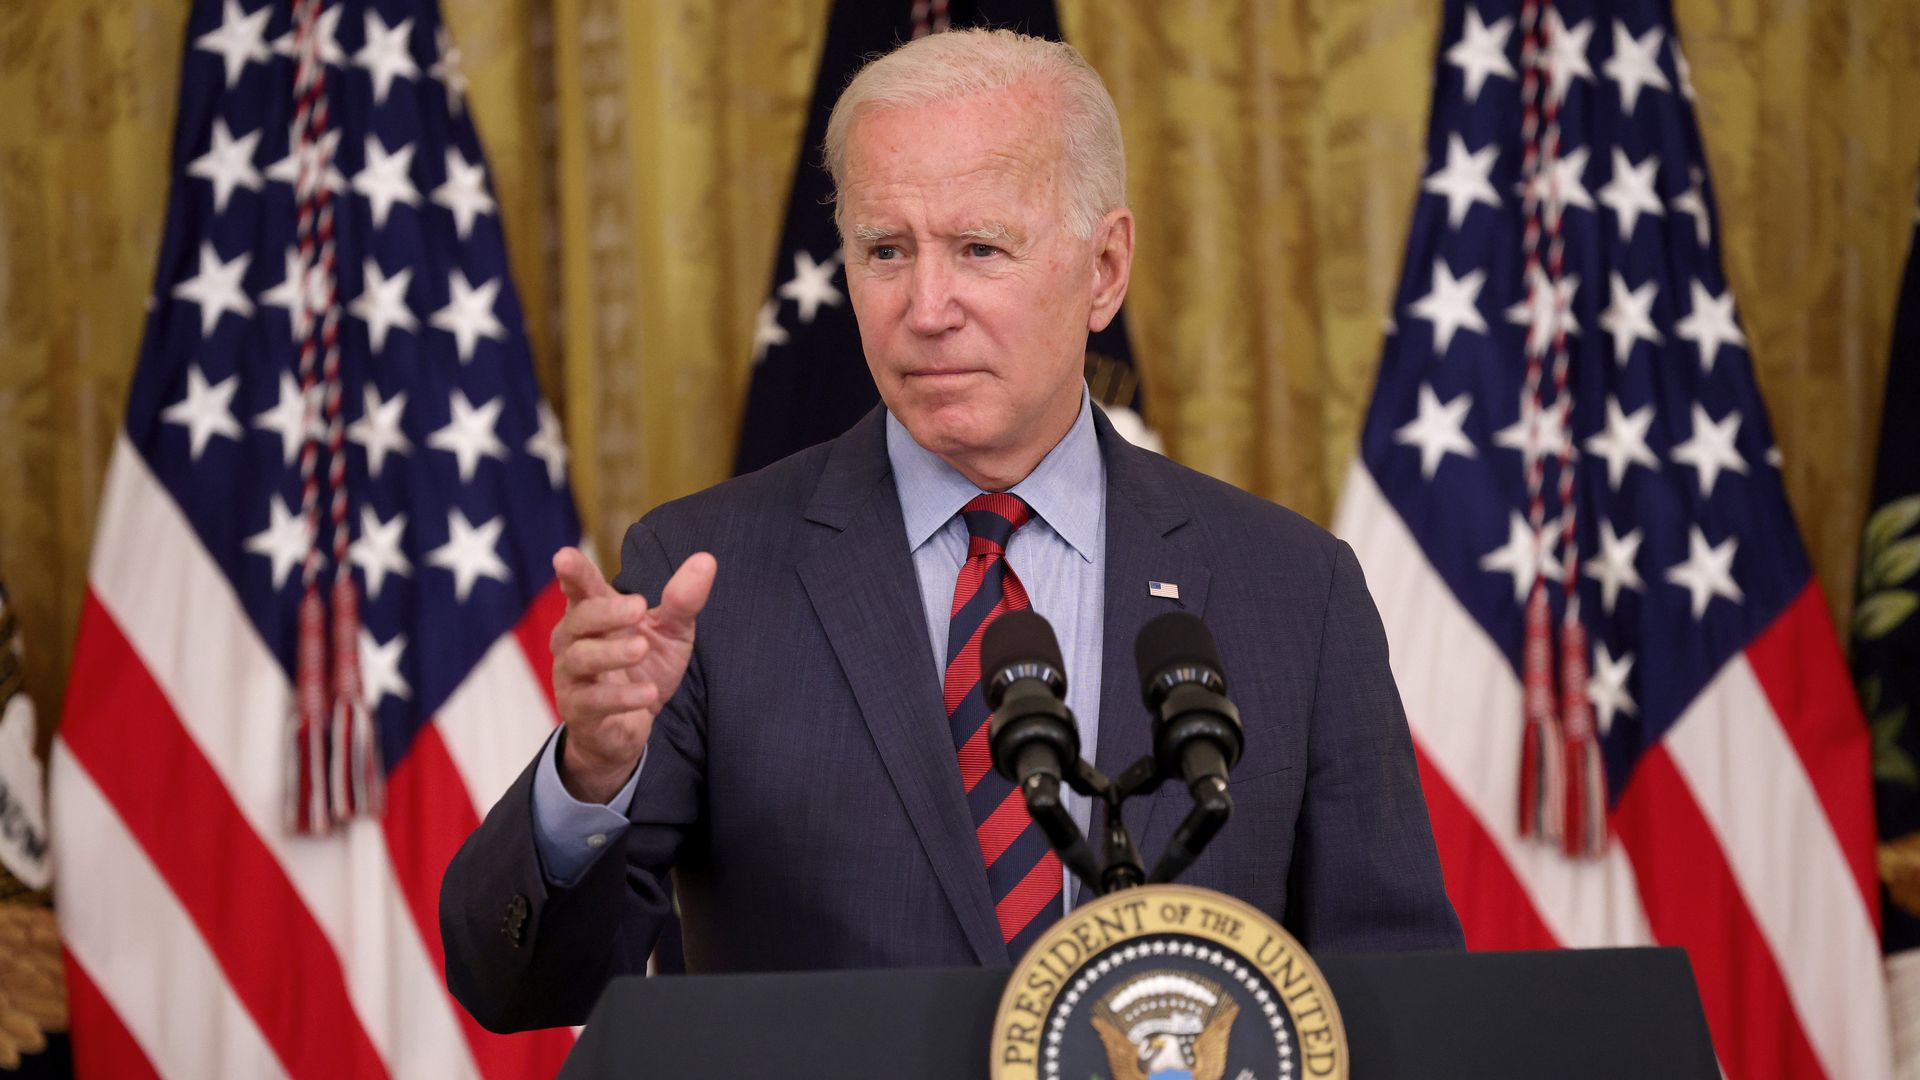 President Joe Biden takes questions during an event in the East Room of the White House August 3